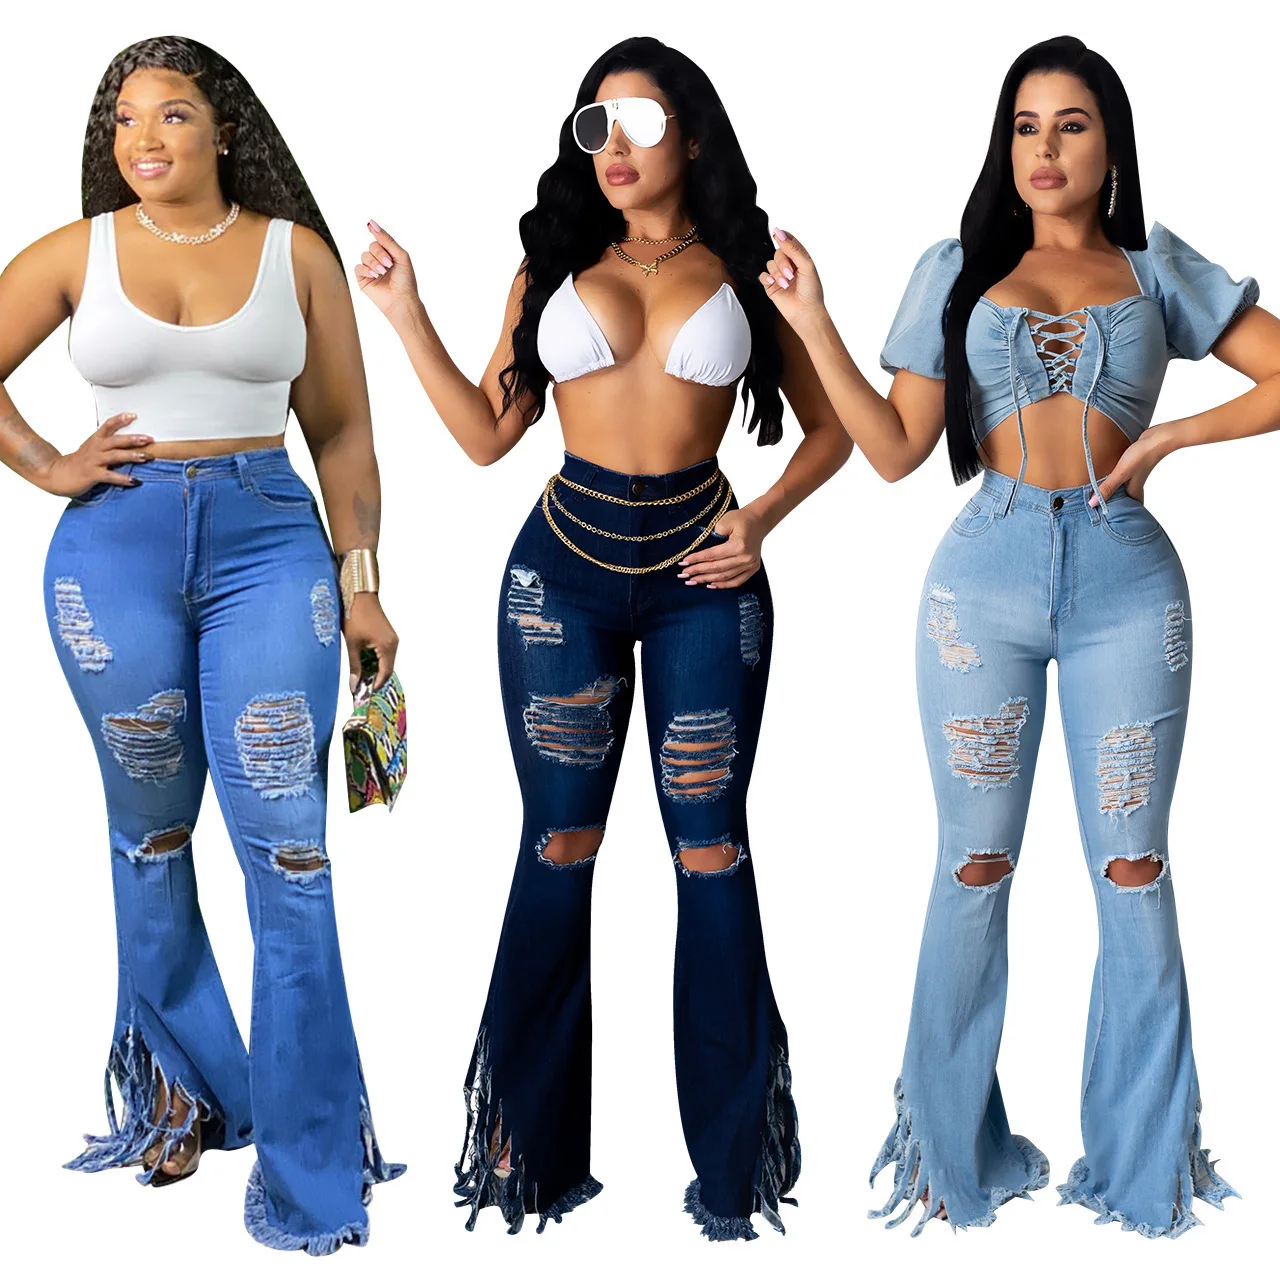 

LOMEMOL Women's Ripped Jeans Fringed Skinny Hip-hop Jeans Classic High-waist Denim Flared Trousers Ripped Jeans for Women